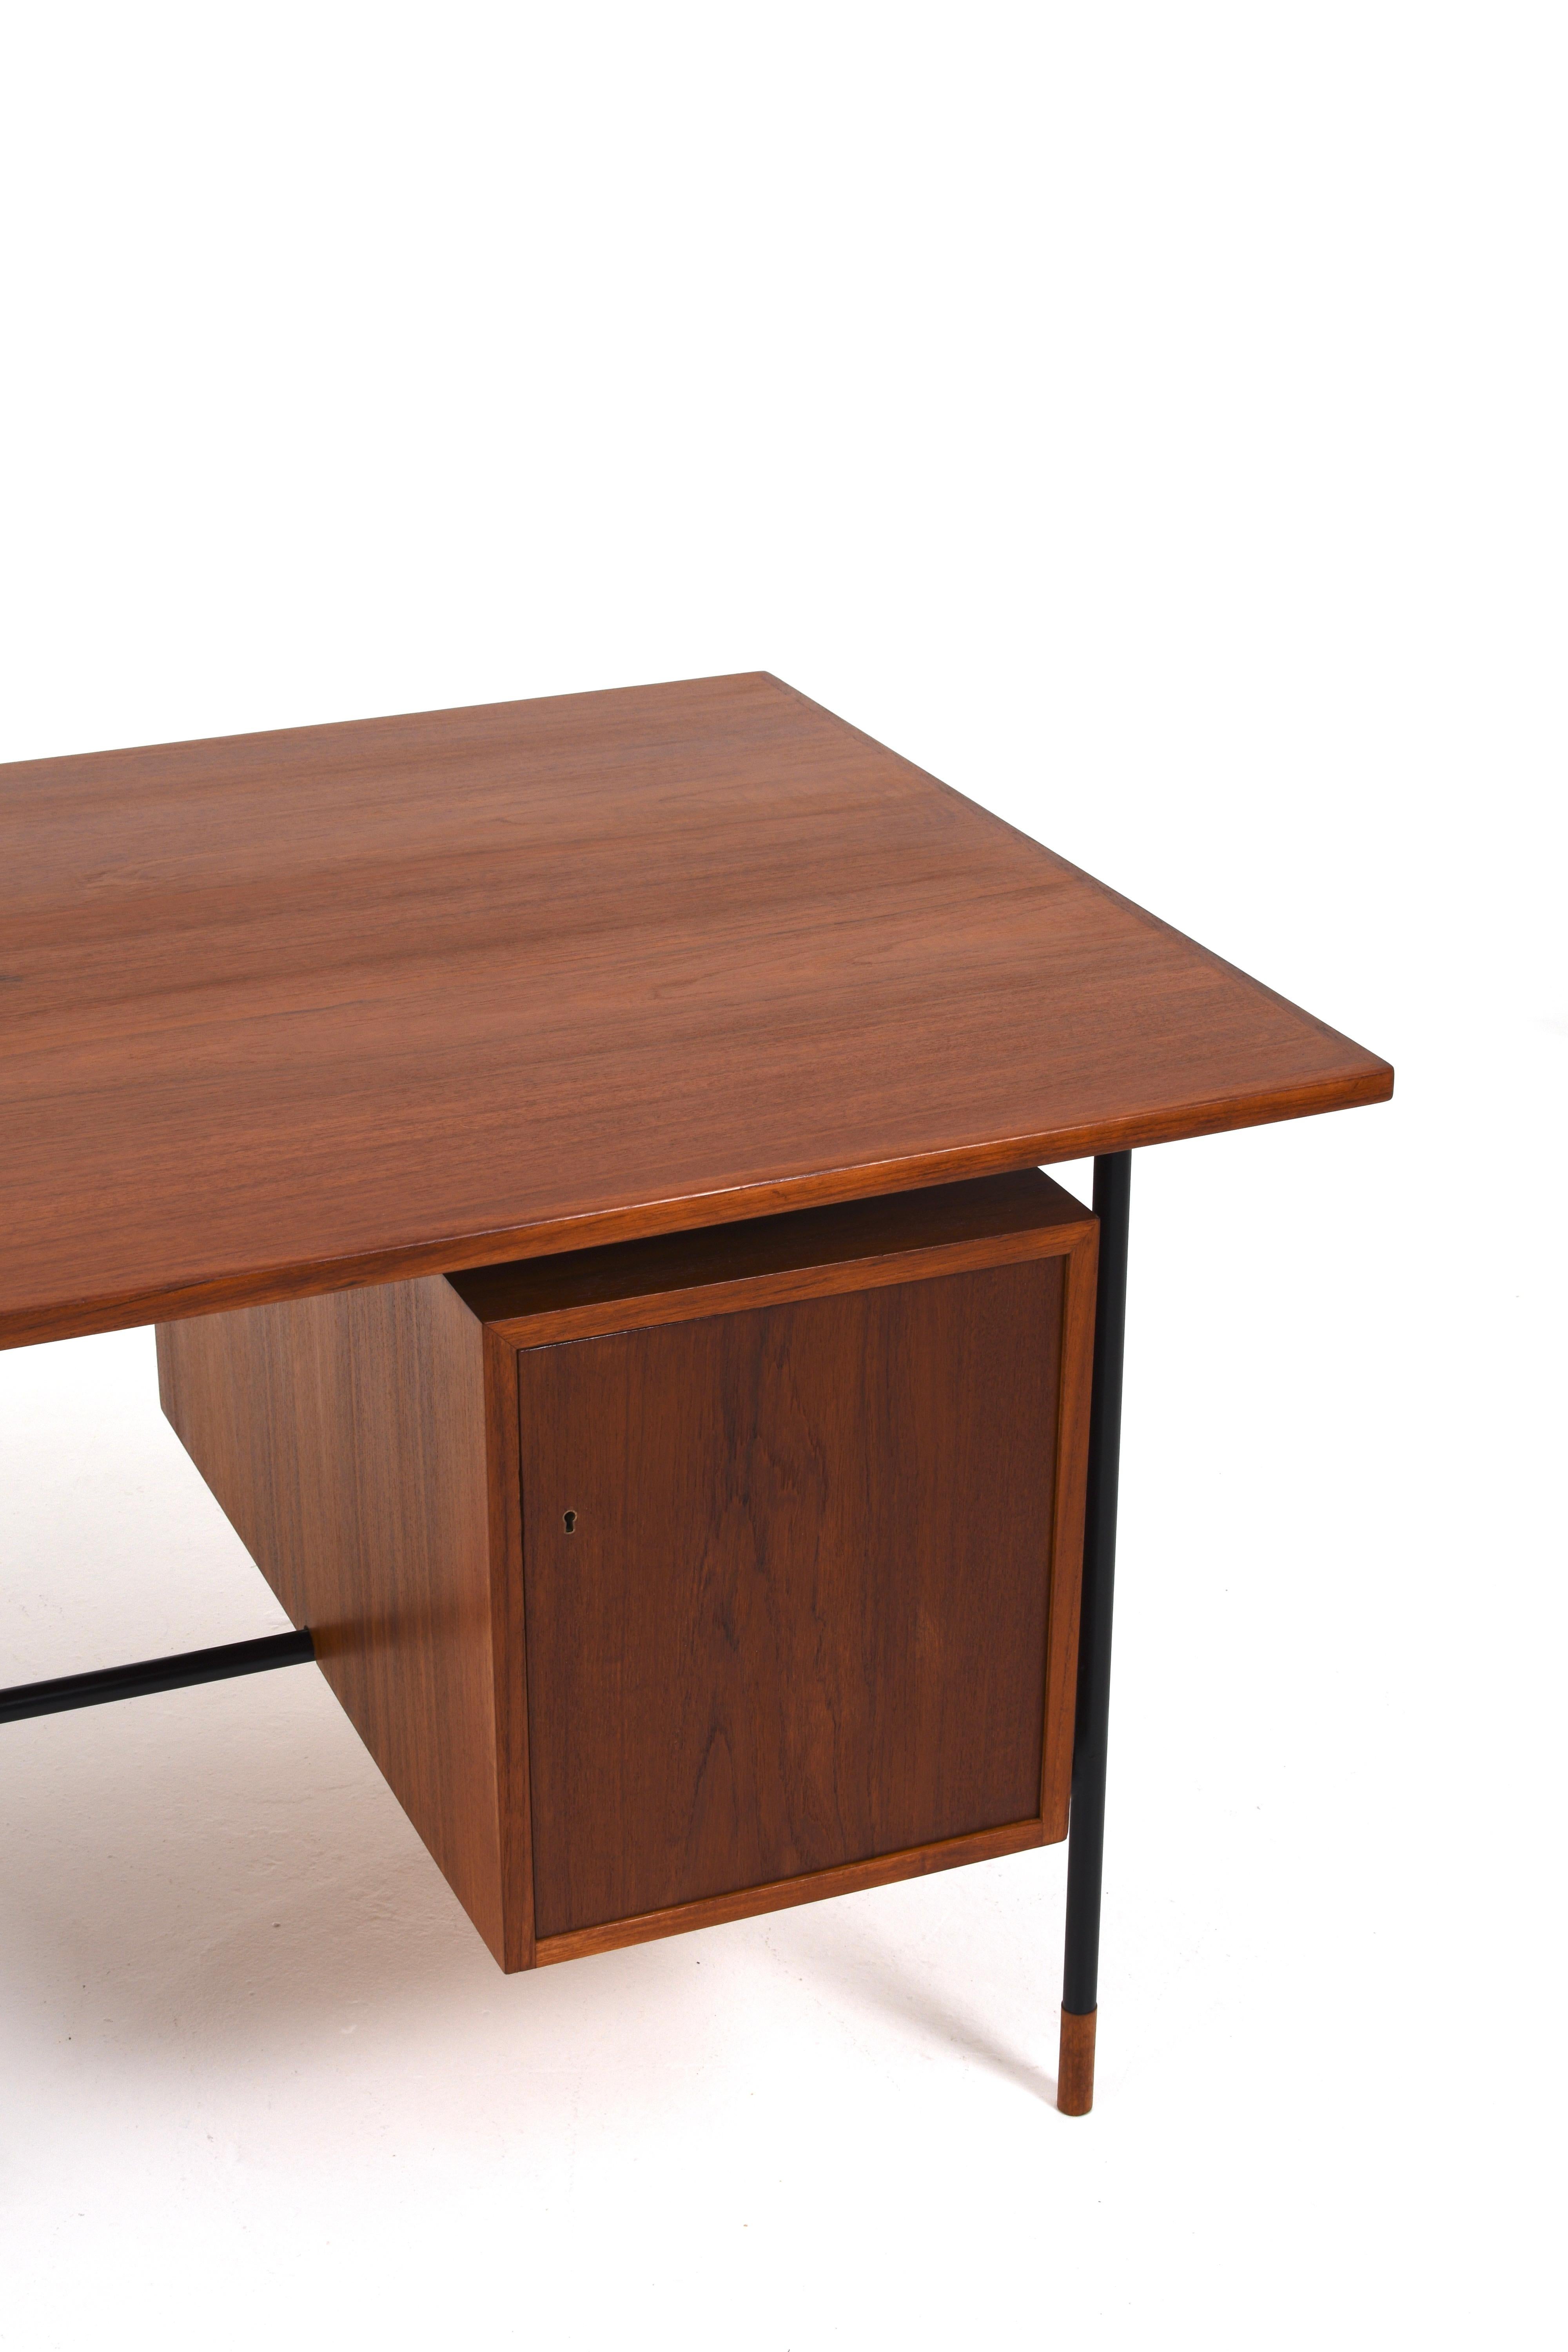 Mid-20th Century Rare Desk H-55 by Åke Hassbjer in teak and steel base, 1950s For Sale